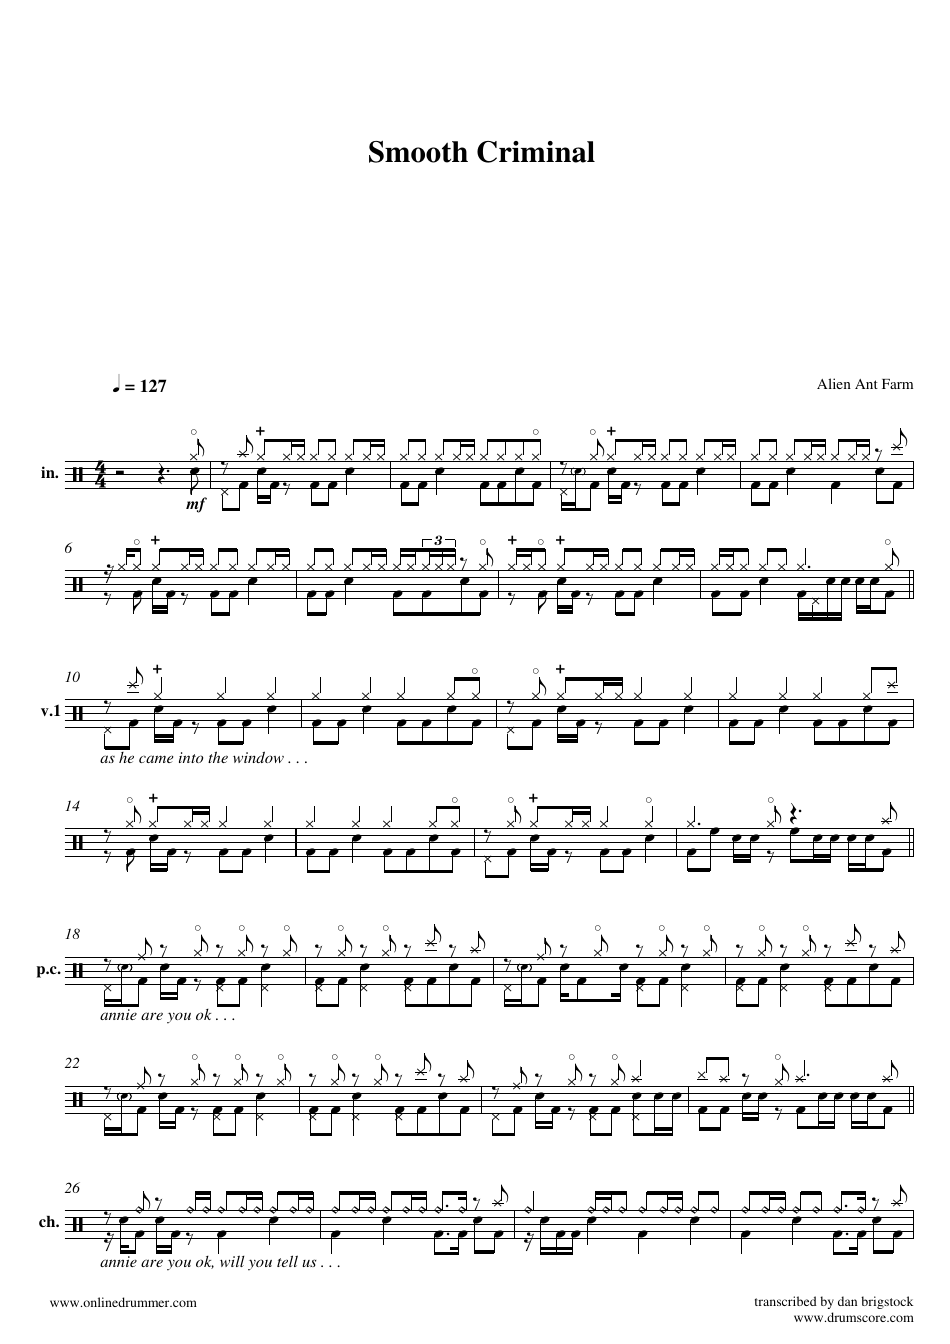 Alien Ant Farm - Smooth Criminal Drum Sheet Music - Preview Image